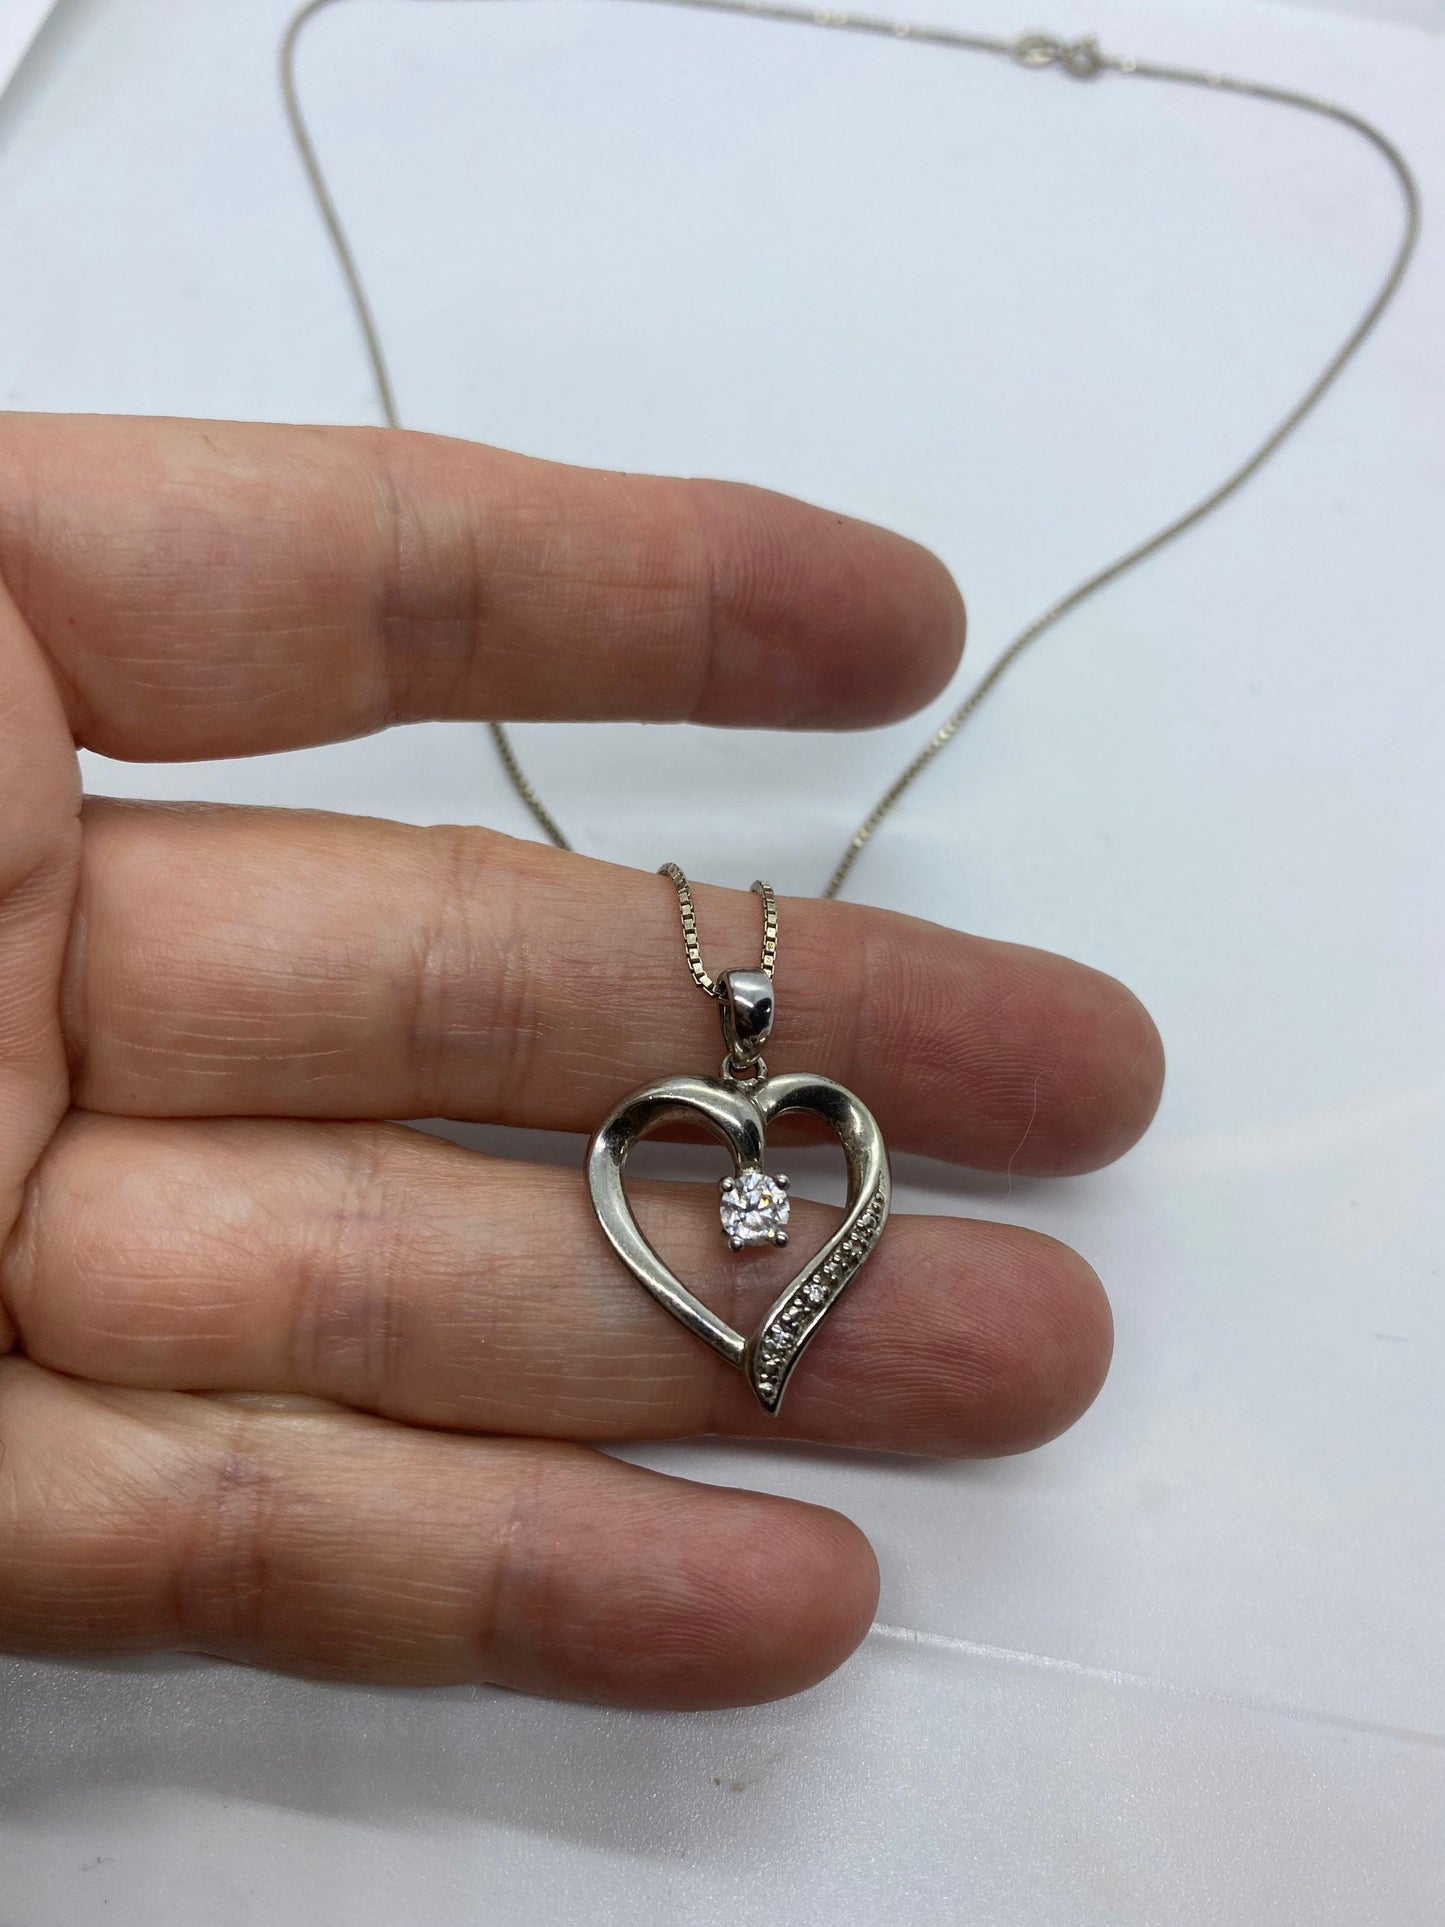 Vintage 925 Sterling Silver White Sapphire Heart Pendant 18 inch necklace